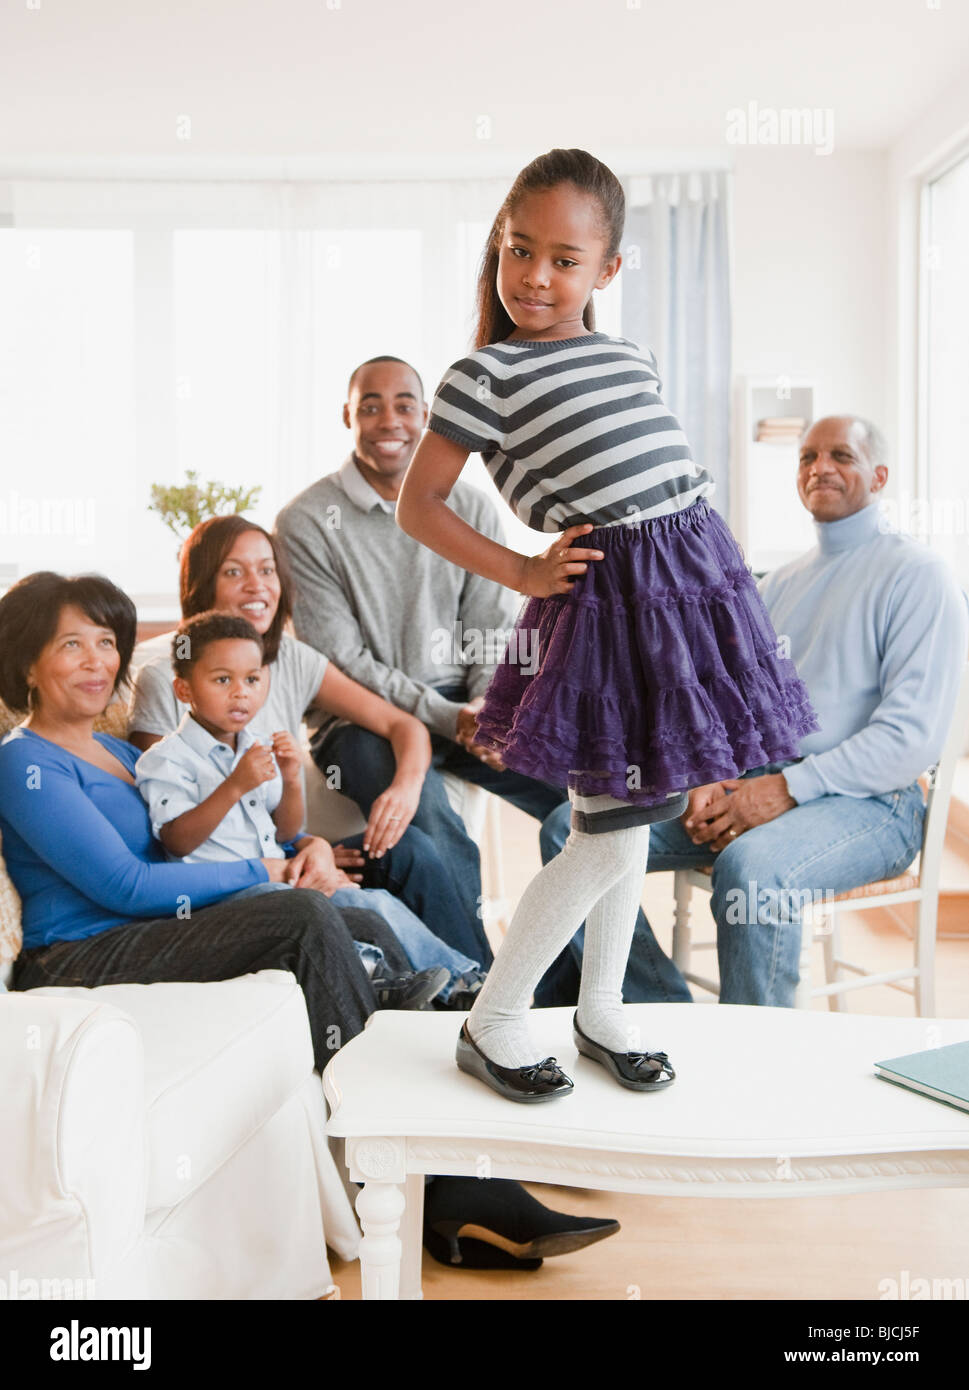 African American family watching daughter standing on table Stock Photo